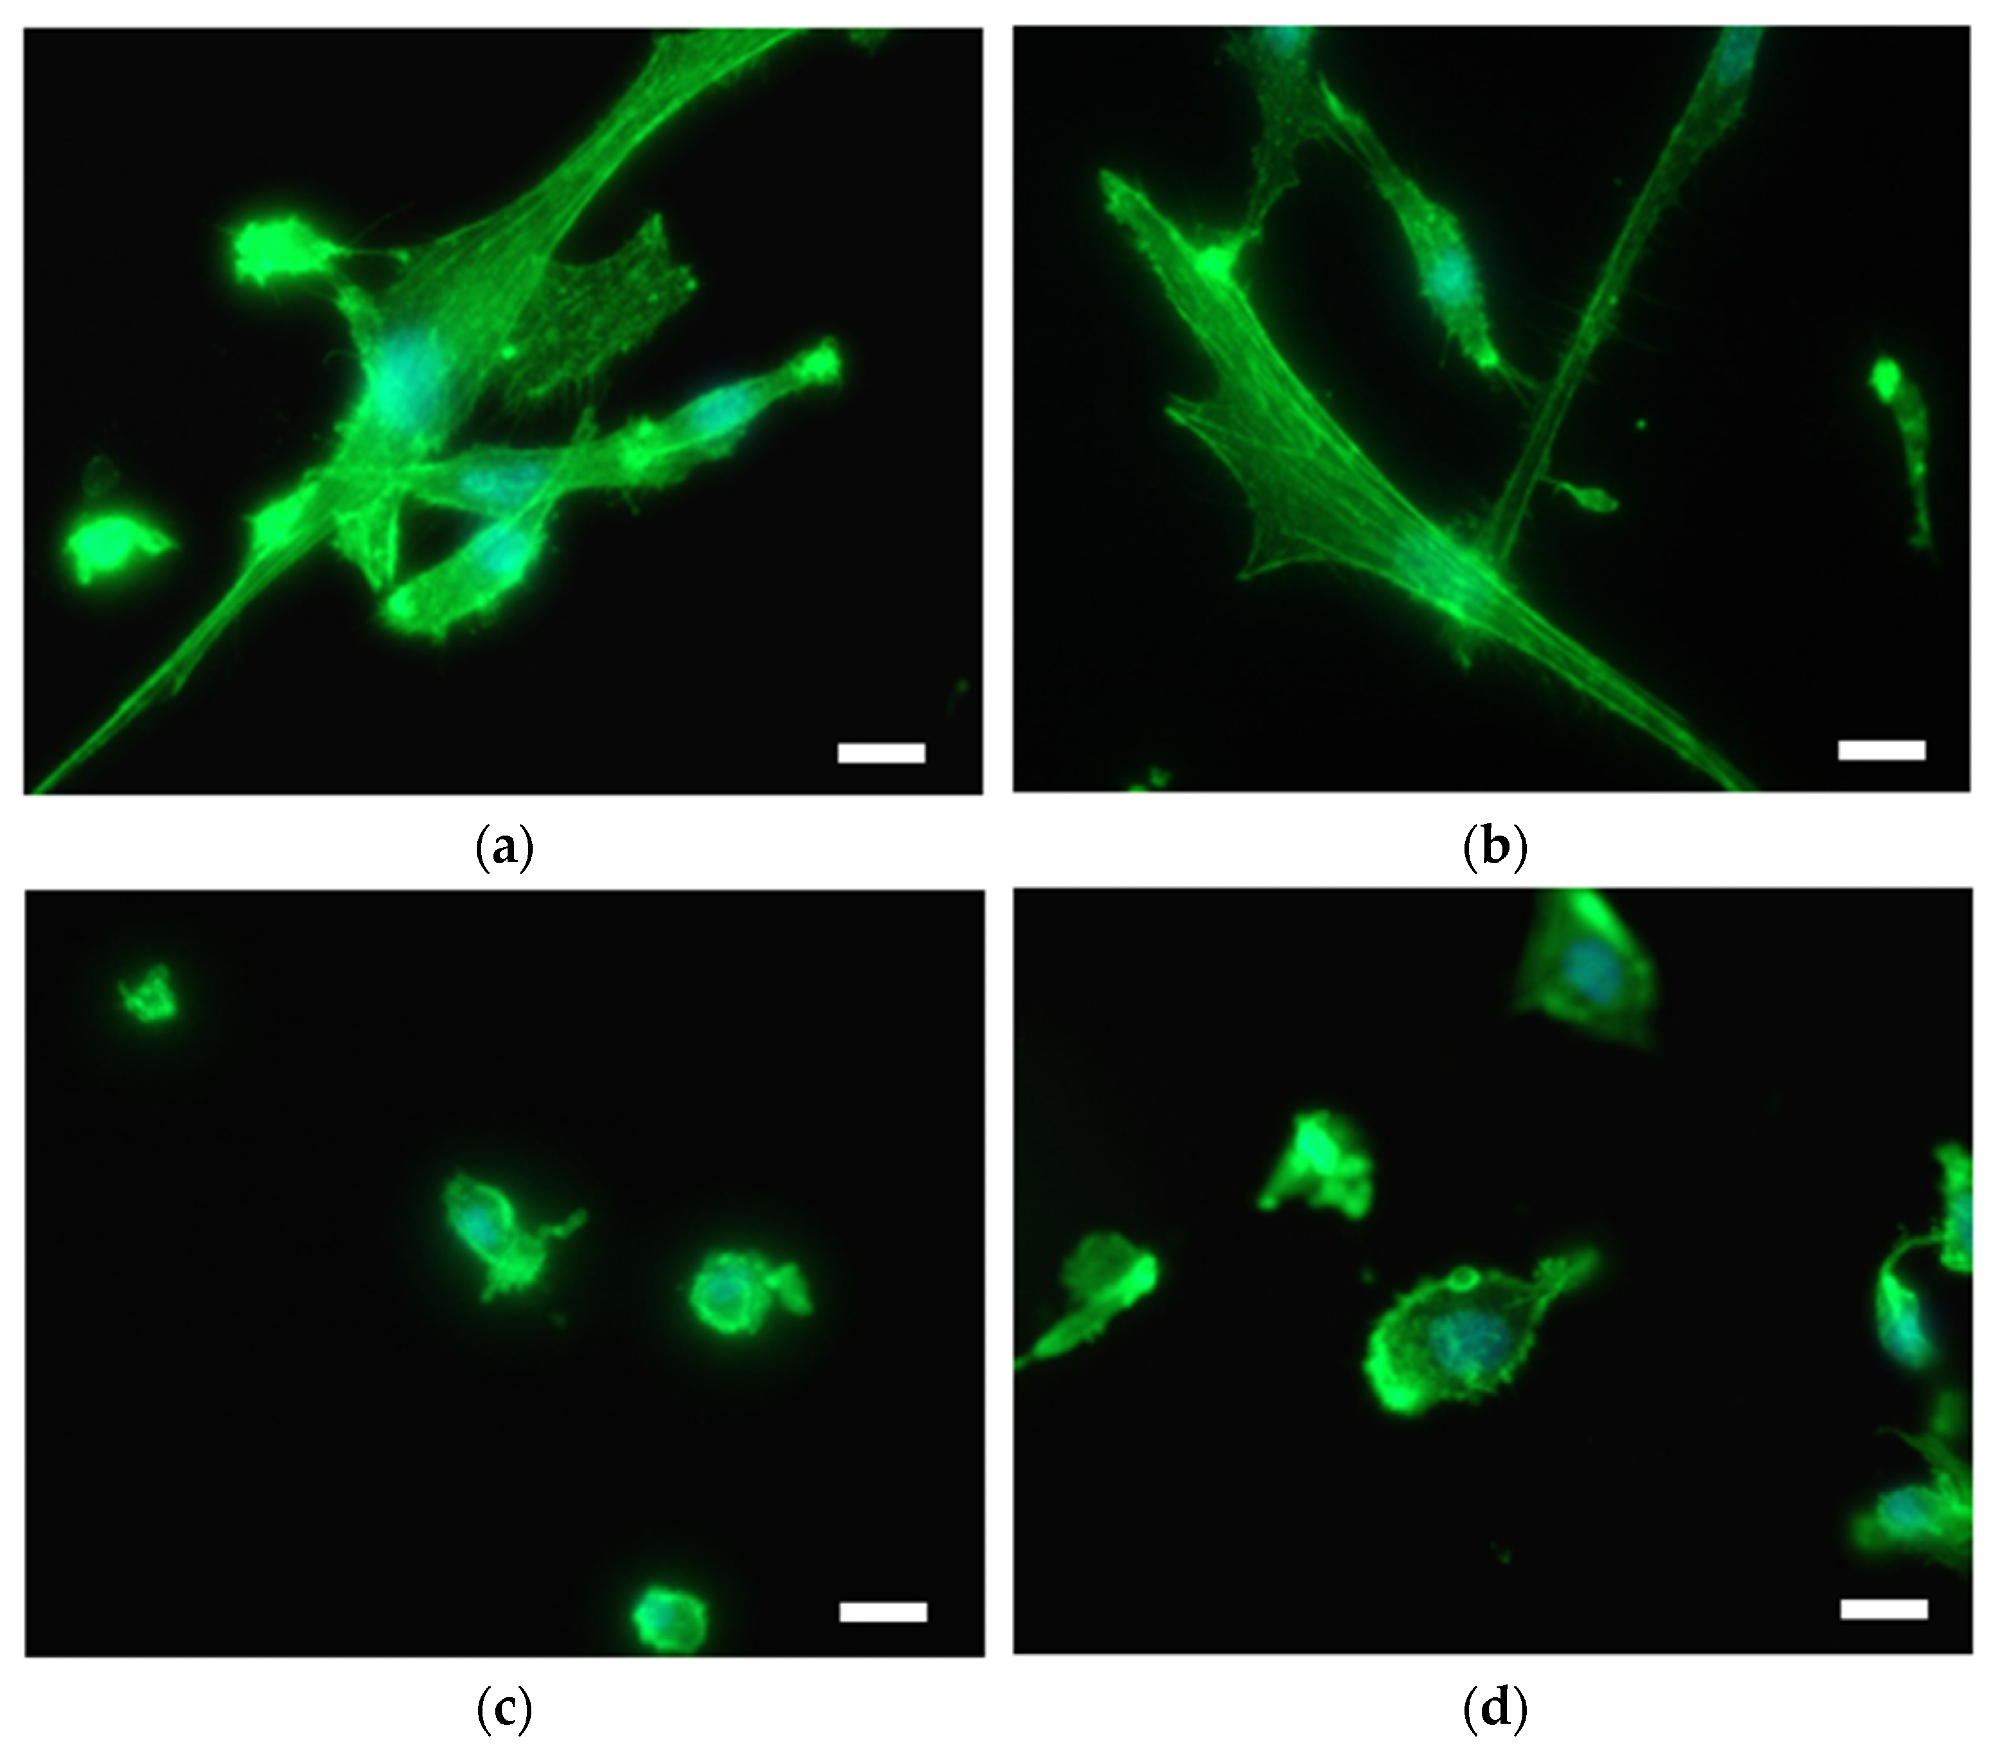 SMC on the surface of (a) Ti foil, (b) plasma-treated Ti foil (Ti + P), (c) hydrothermally treated Ti foil (Ti HT) and (d) hydrothermally/plasma-treated Ti foil (Ti HT + P), determined by immunofluorescent microscopy. F-actin is shown in green (Fluorescein Phalloidin). Nuclei are visualized with DAPI (blue color). Scale bar = 25 µm.